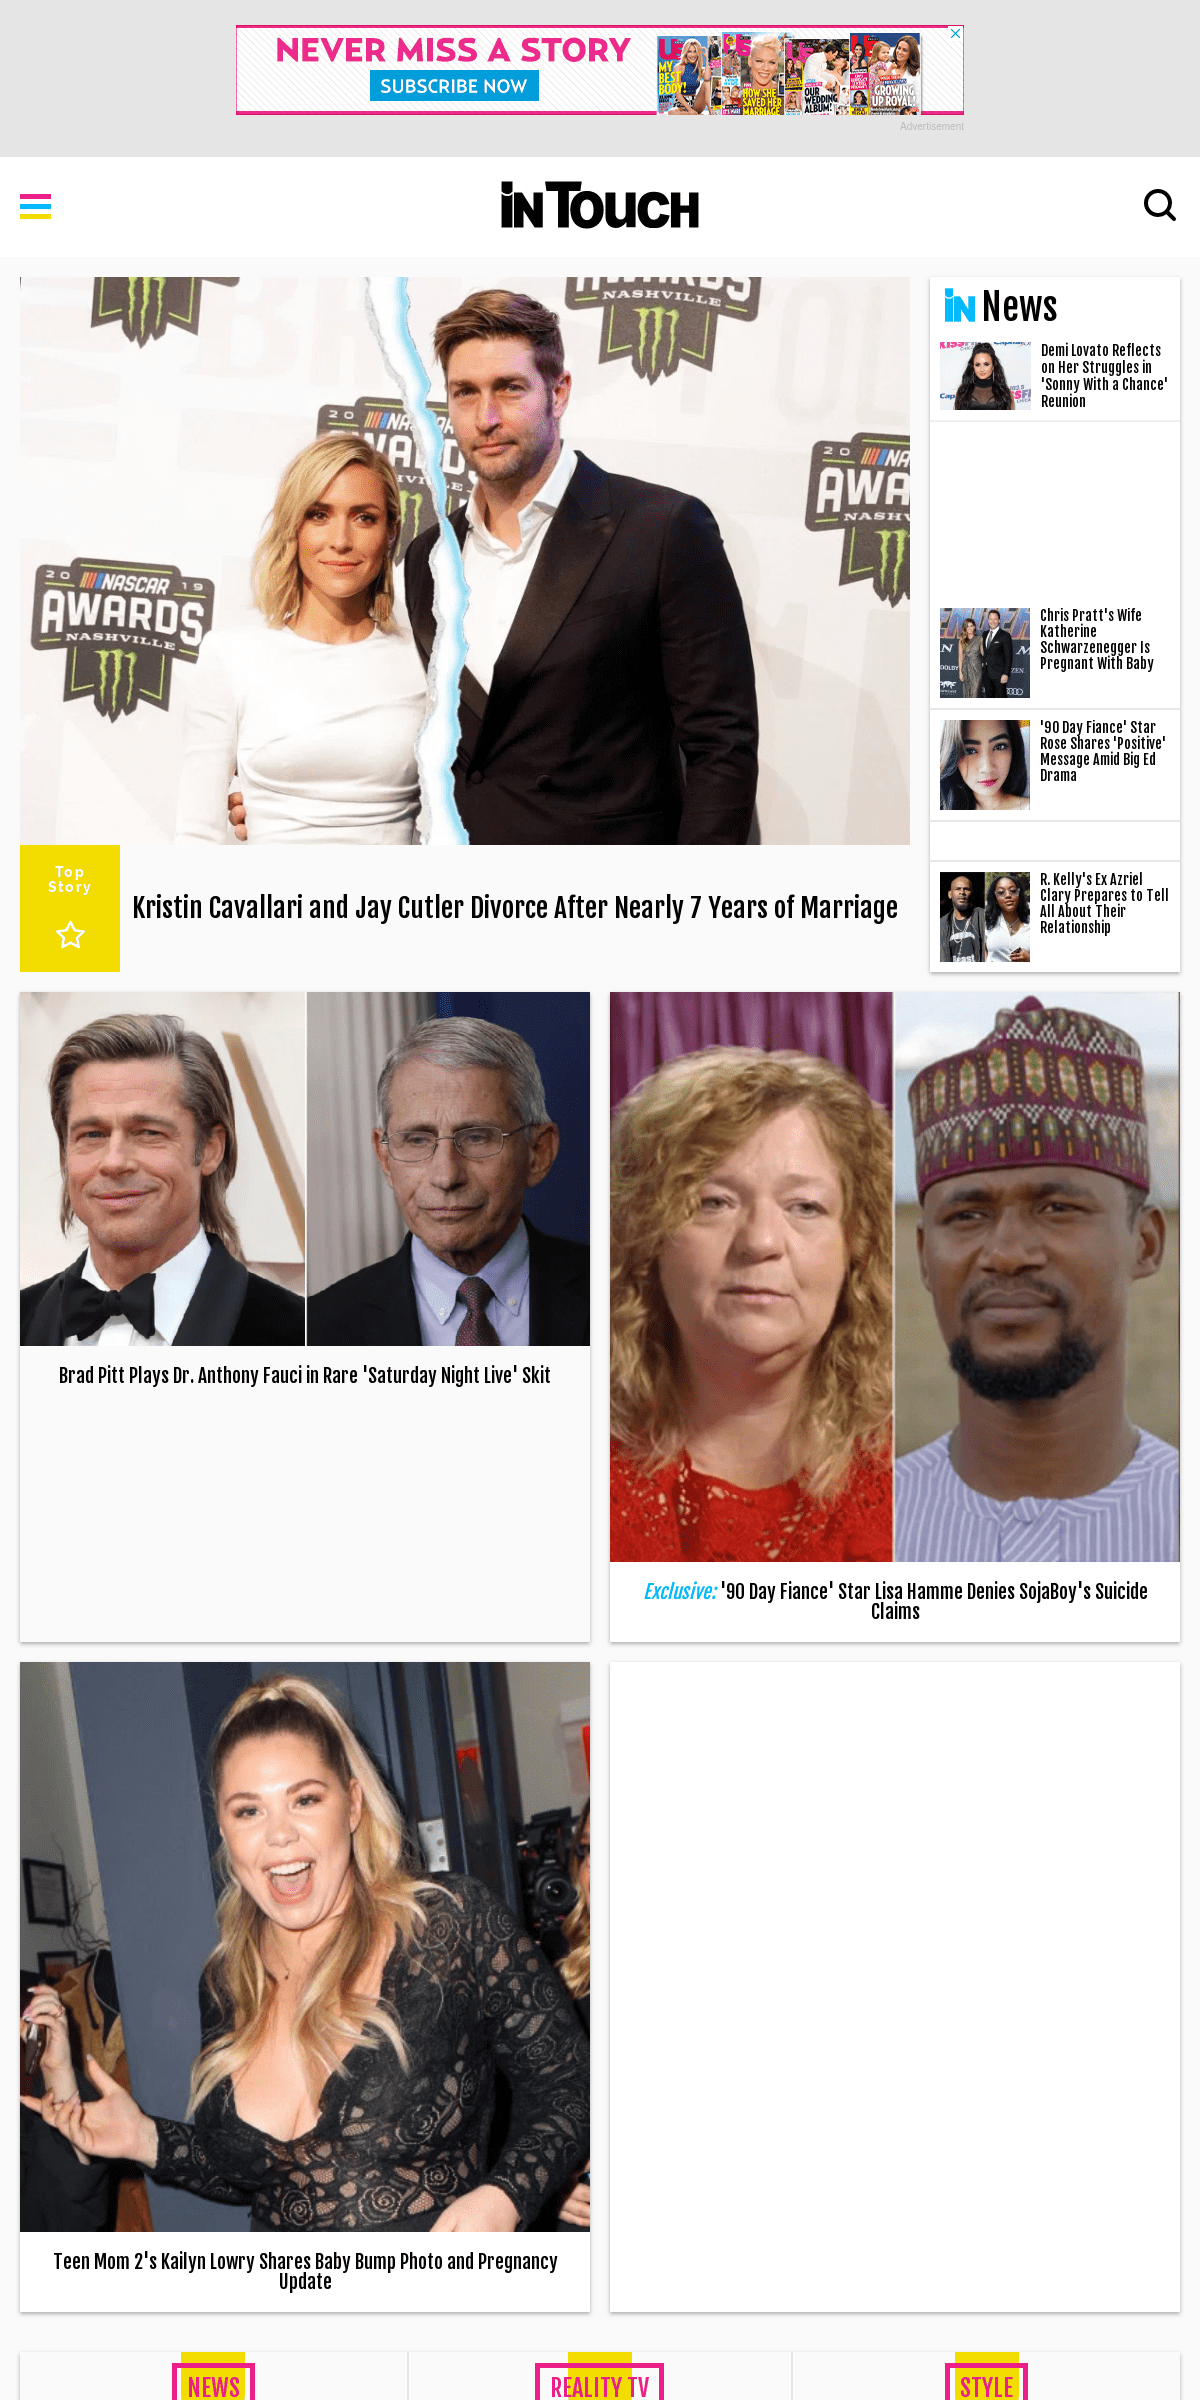 A complete backup of intouchweekly.com